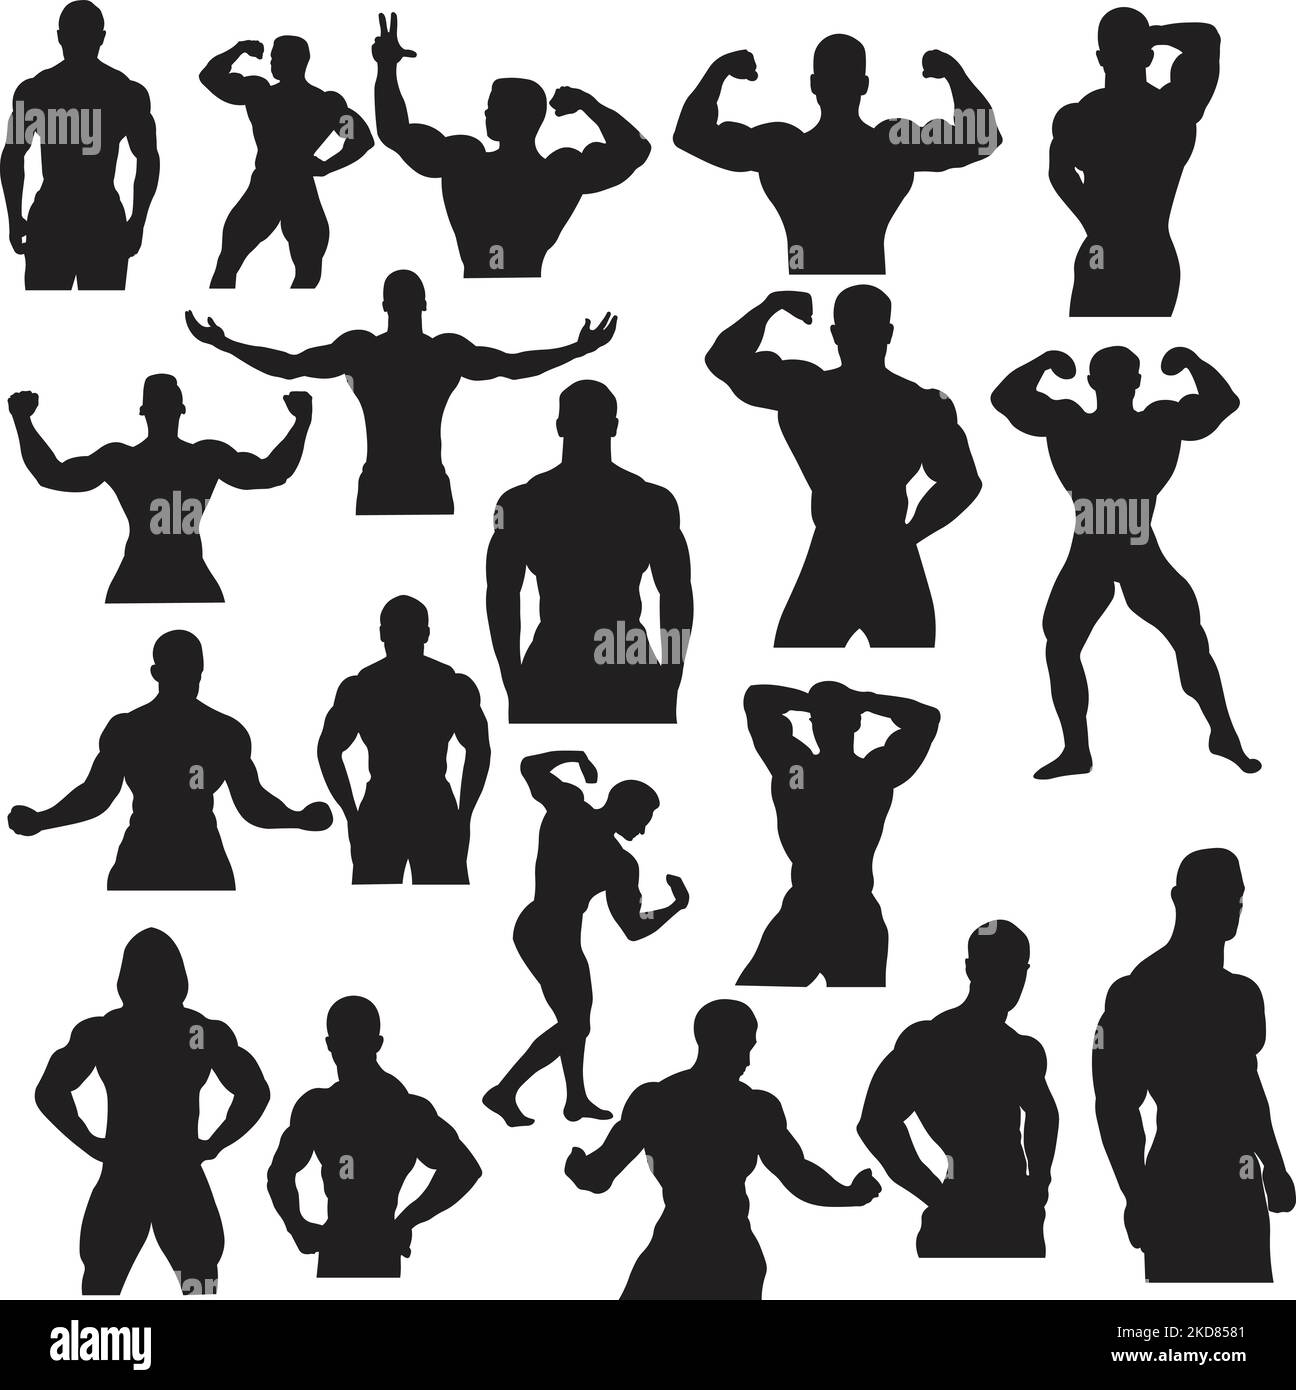 A digital illustration set of silhouettes of fit men on a white background Stock Vector